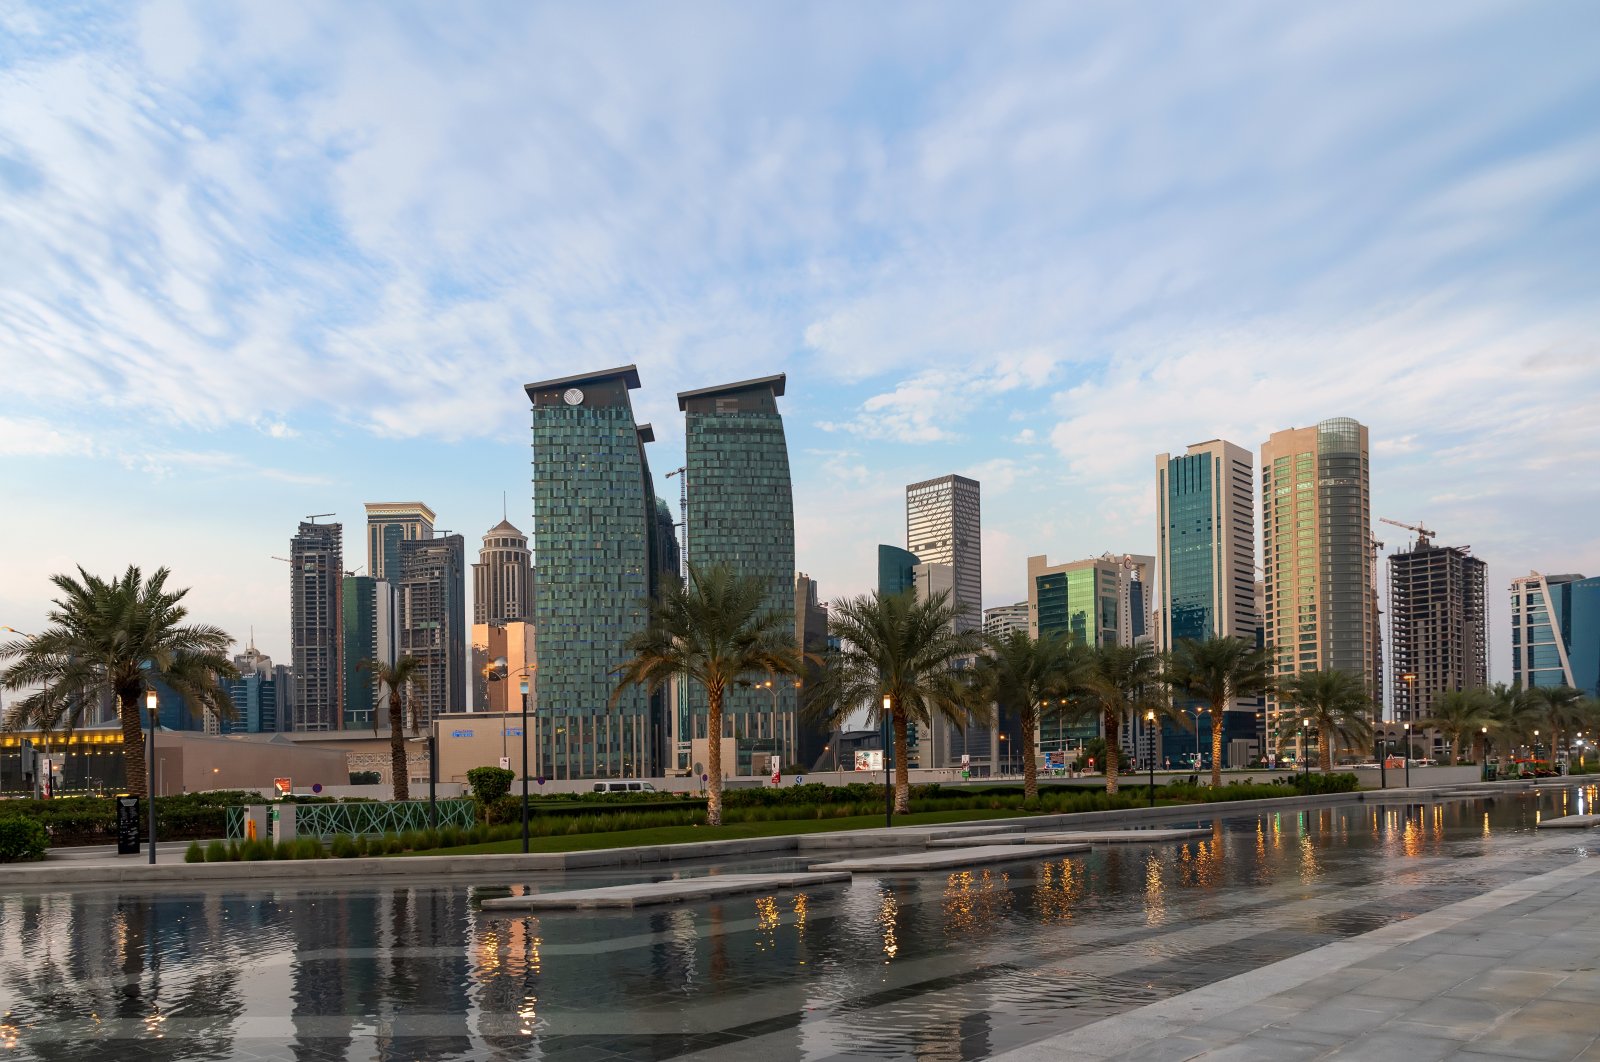 Bank headquarters and office buildings seen at Sheraton Park in downtown Doha, Qatar, Nov. 28, 2019. (Shutterstock Photo)